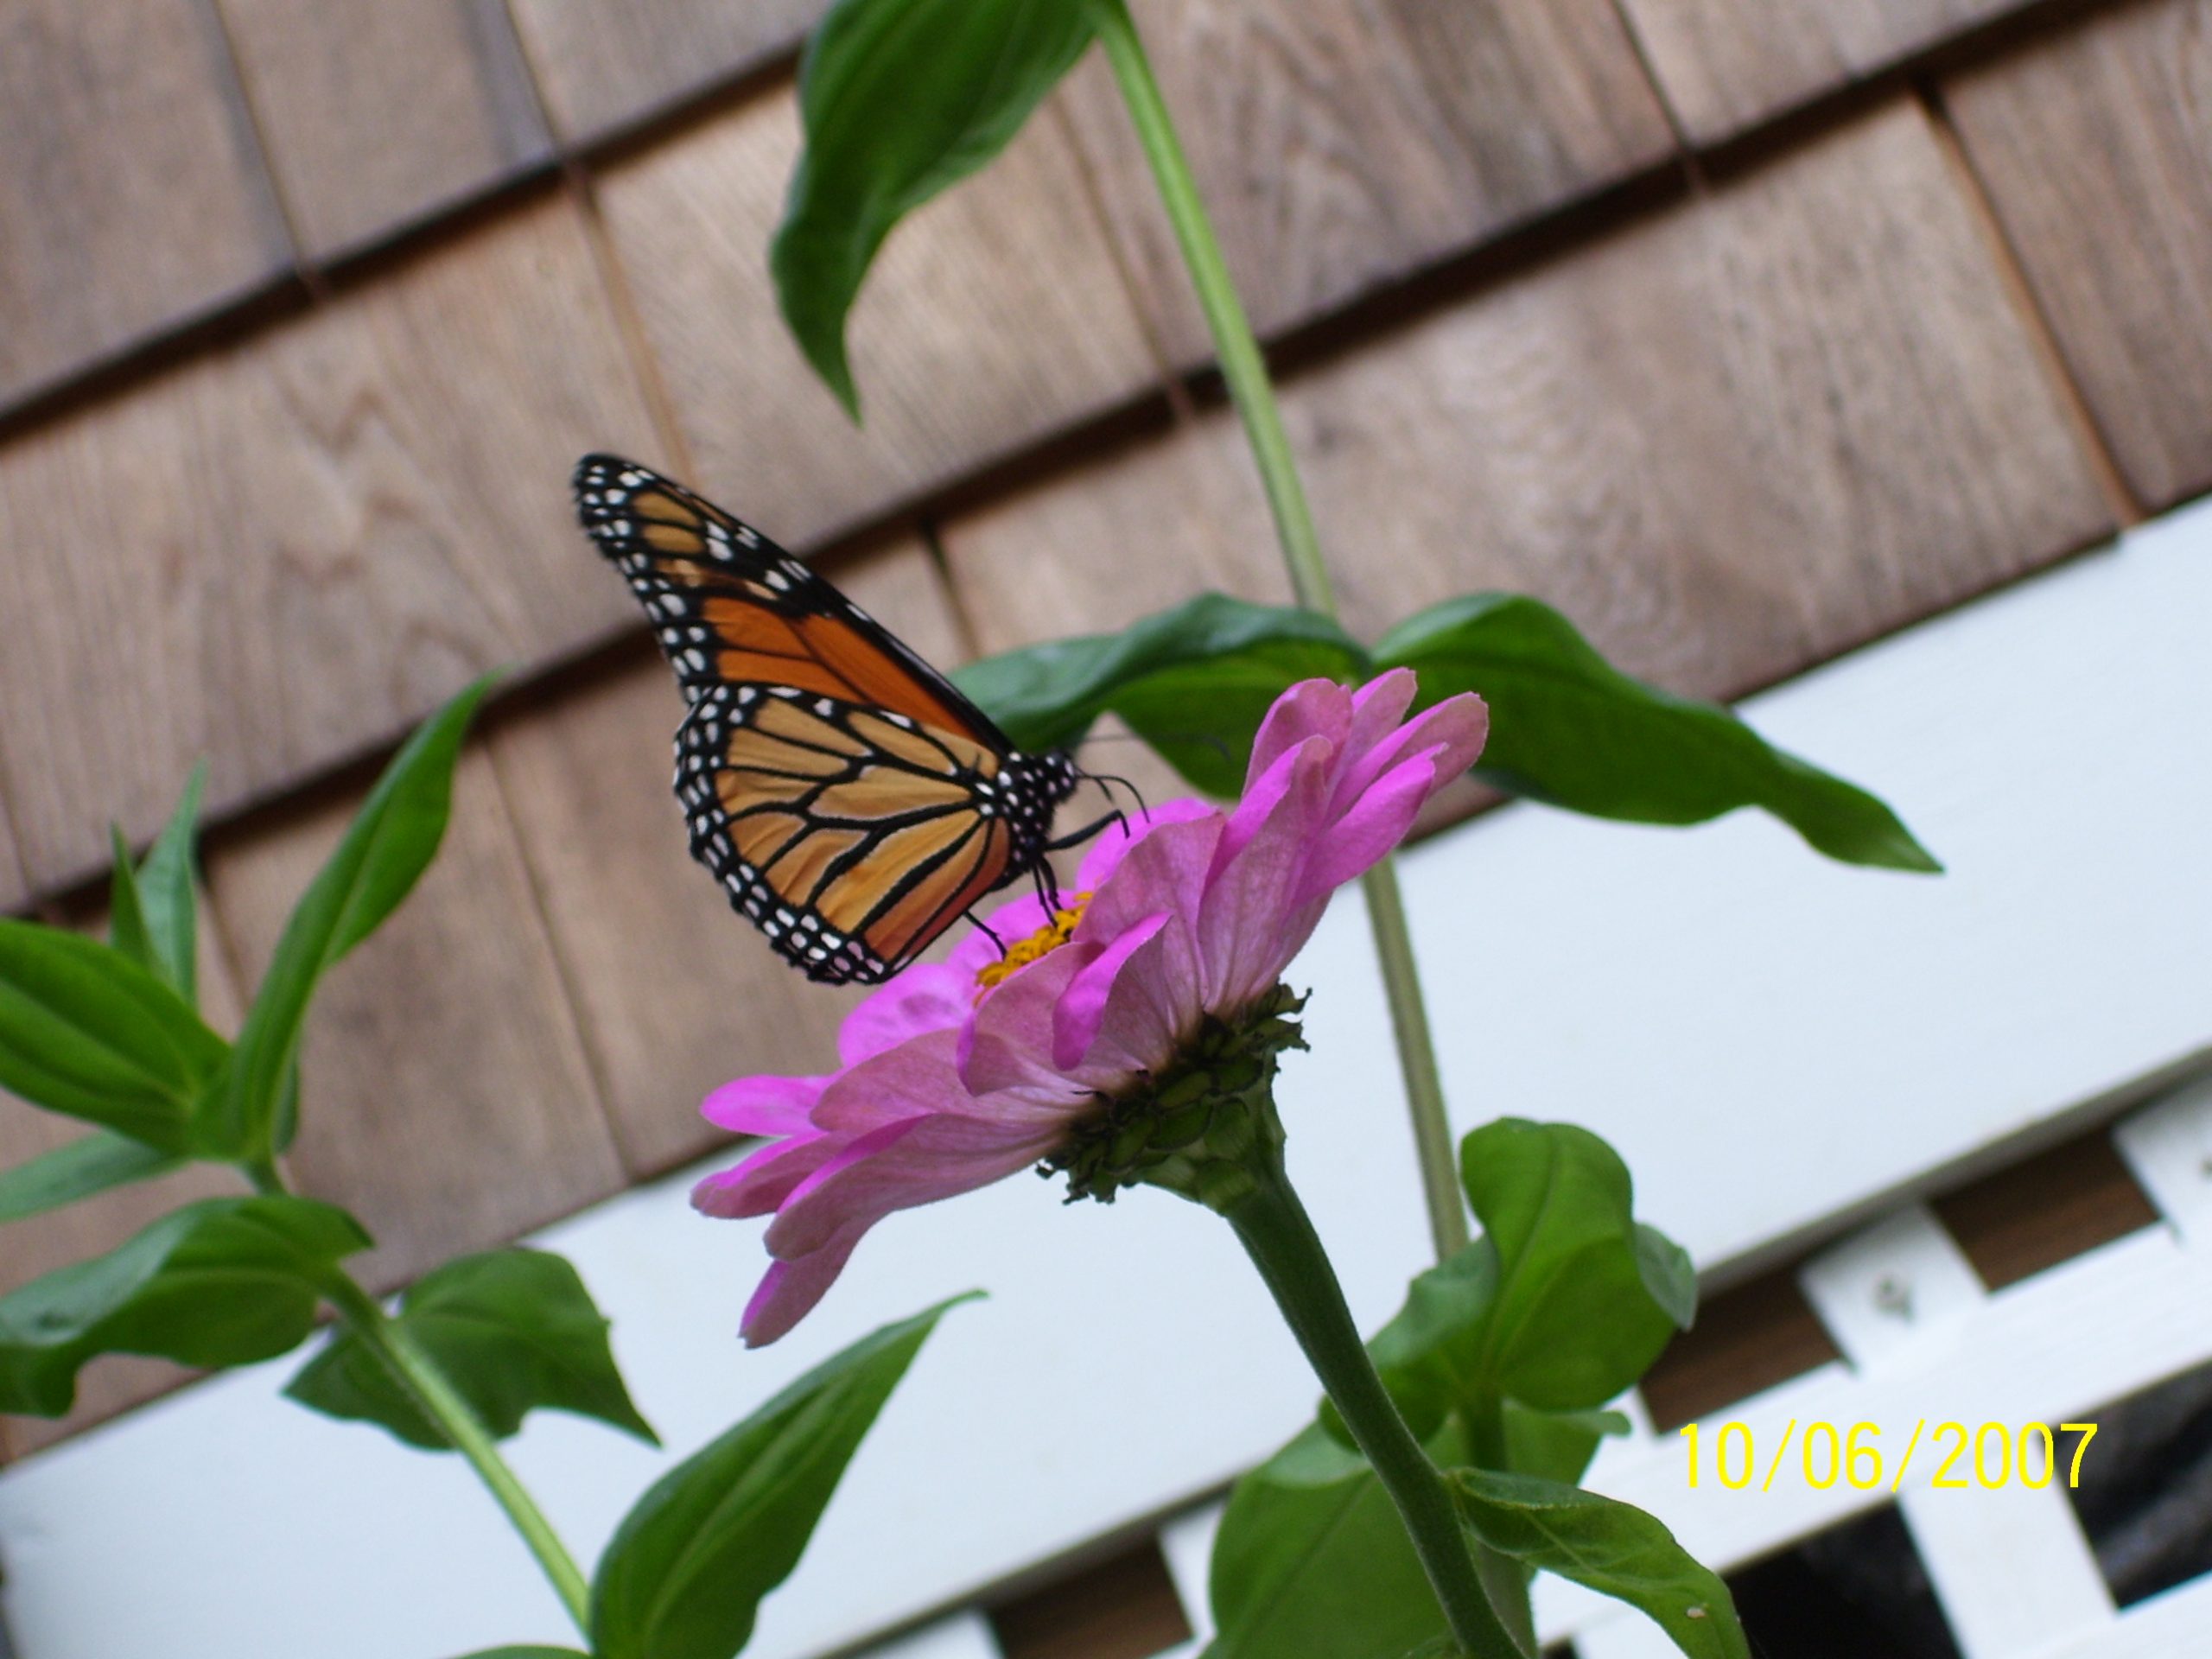 Butterfly On Zinnia (user submitted)